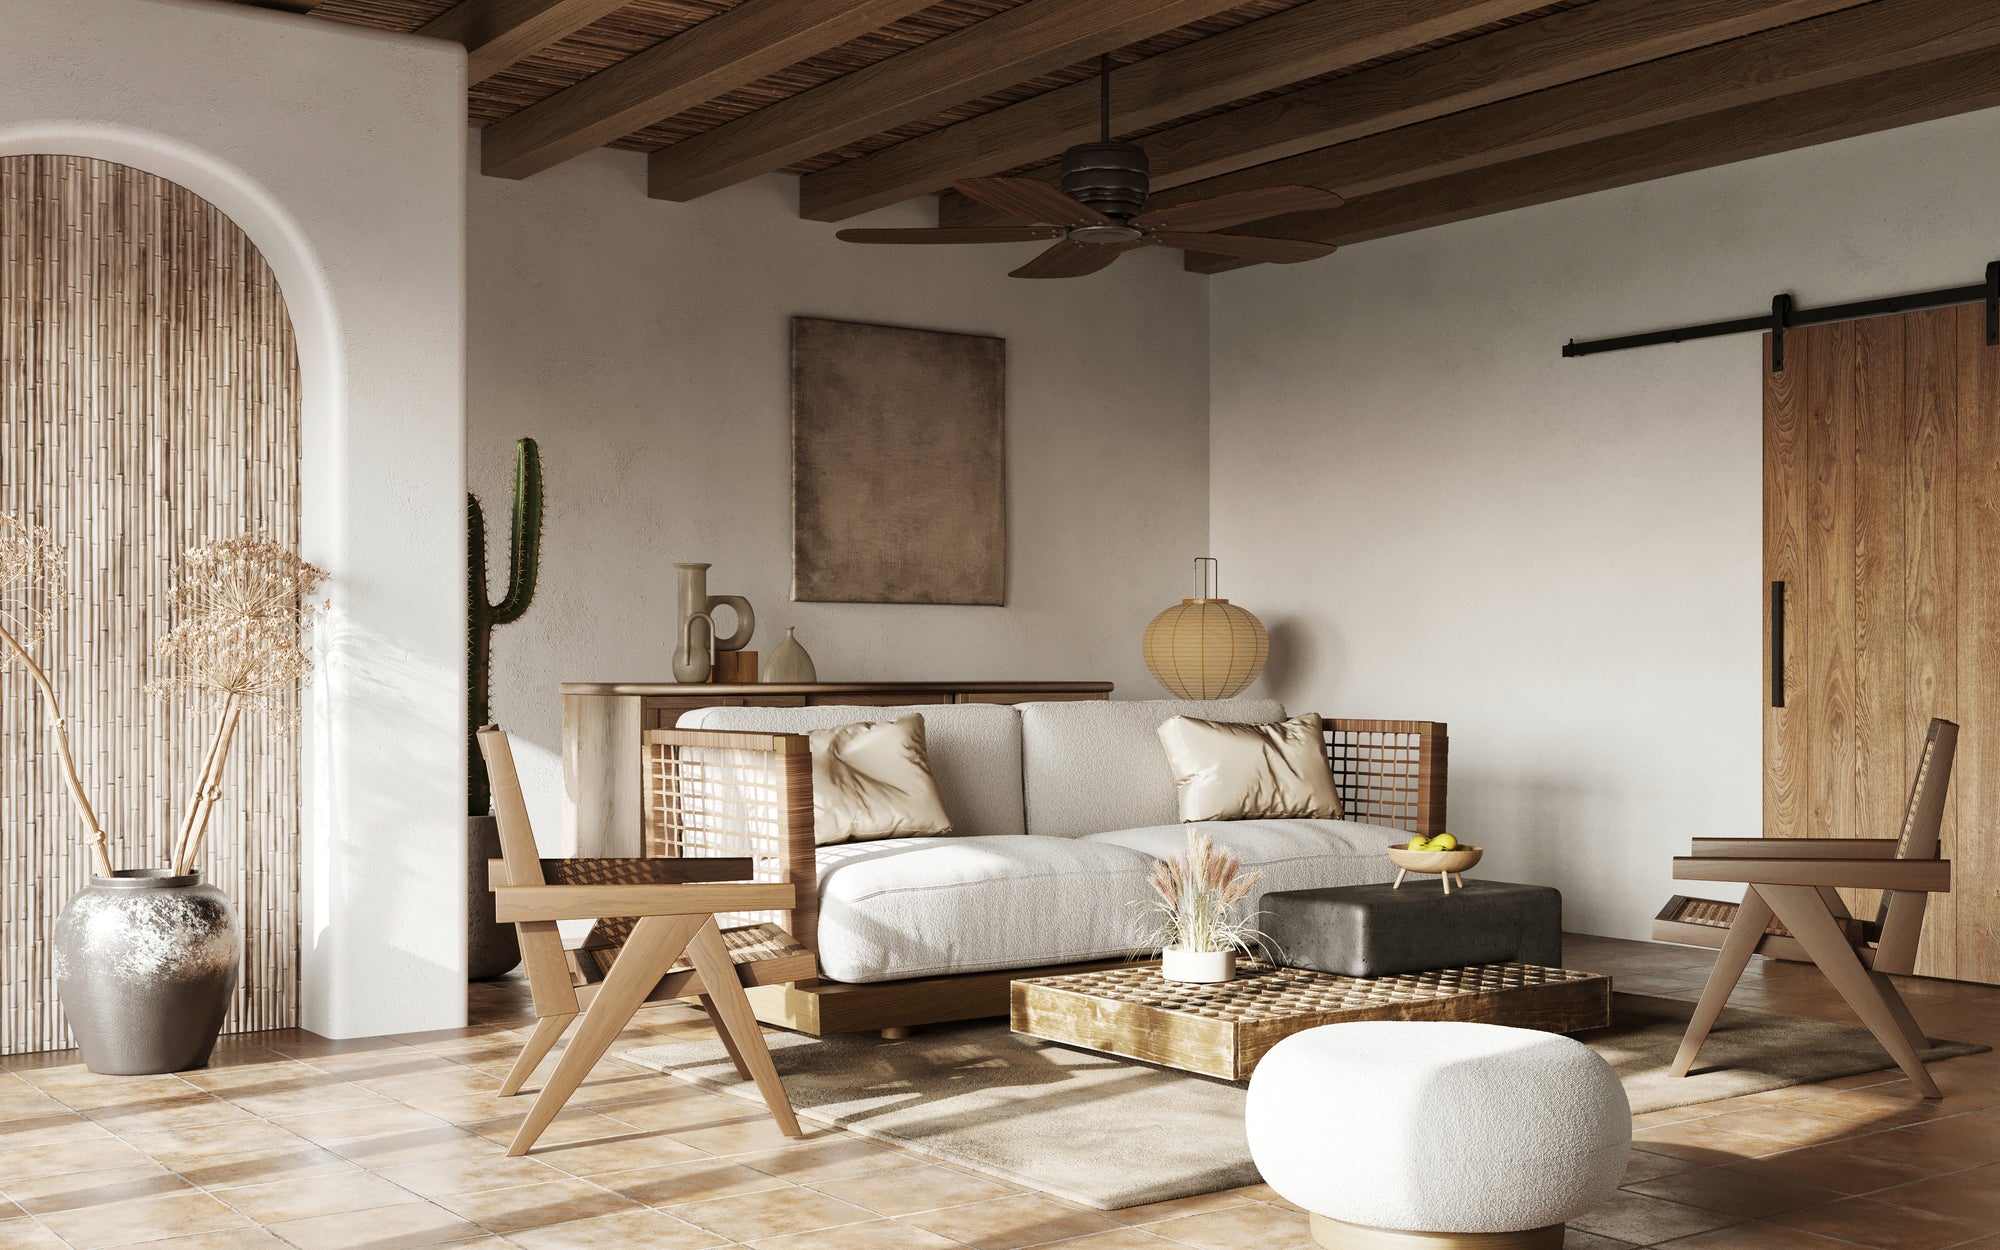 13 Ideas to Turn Your Living Room into a Rustic Escape